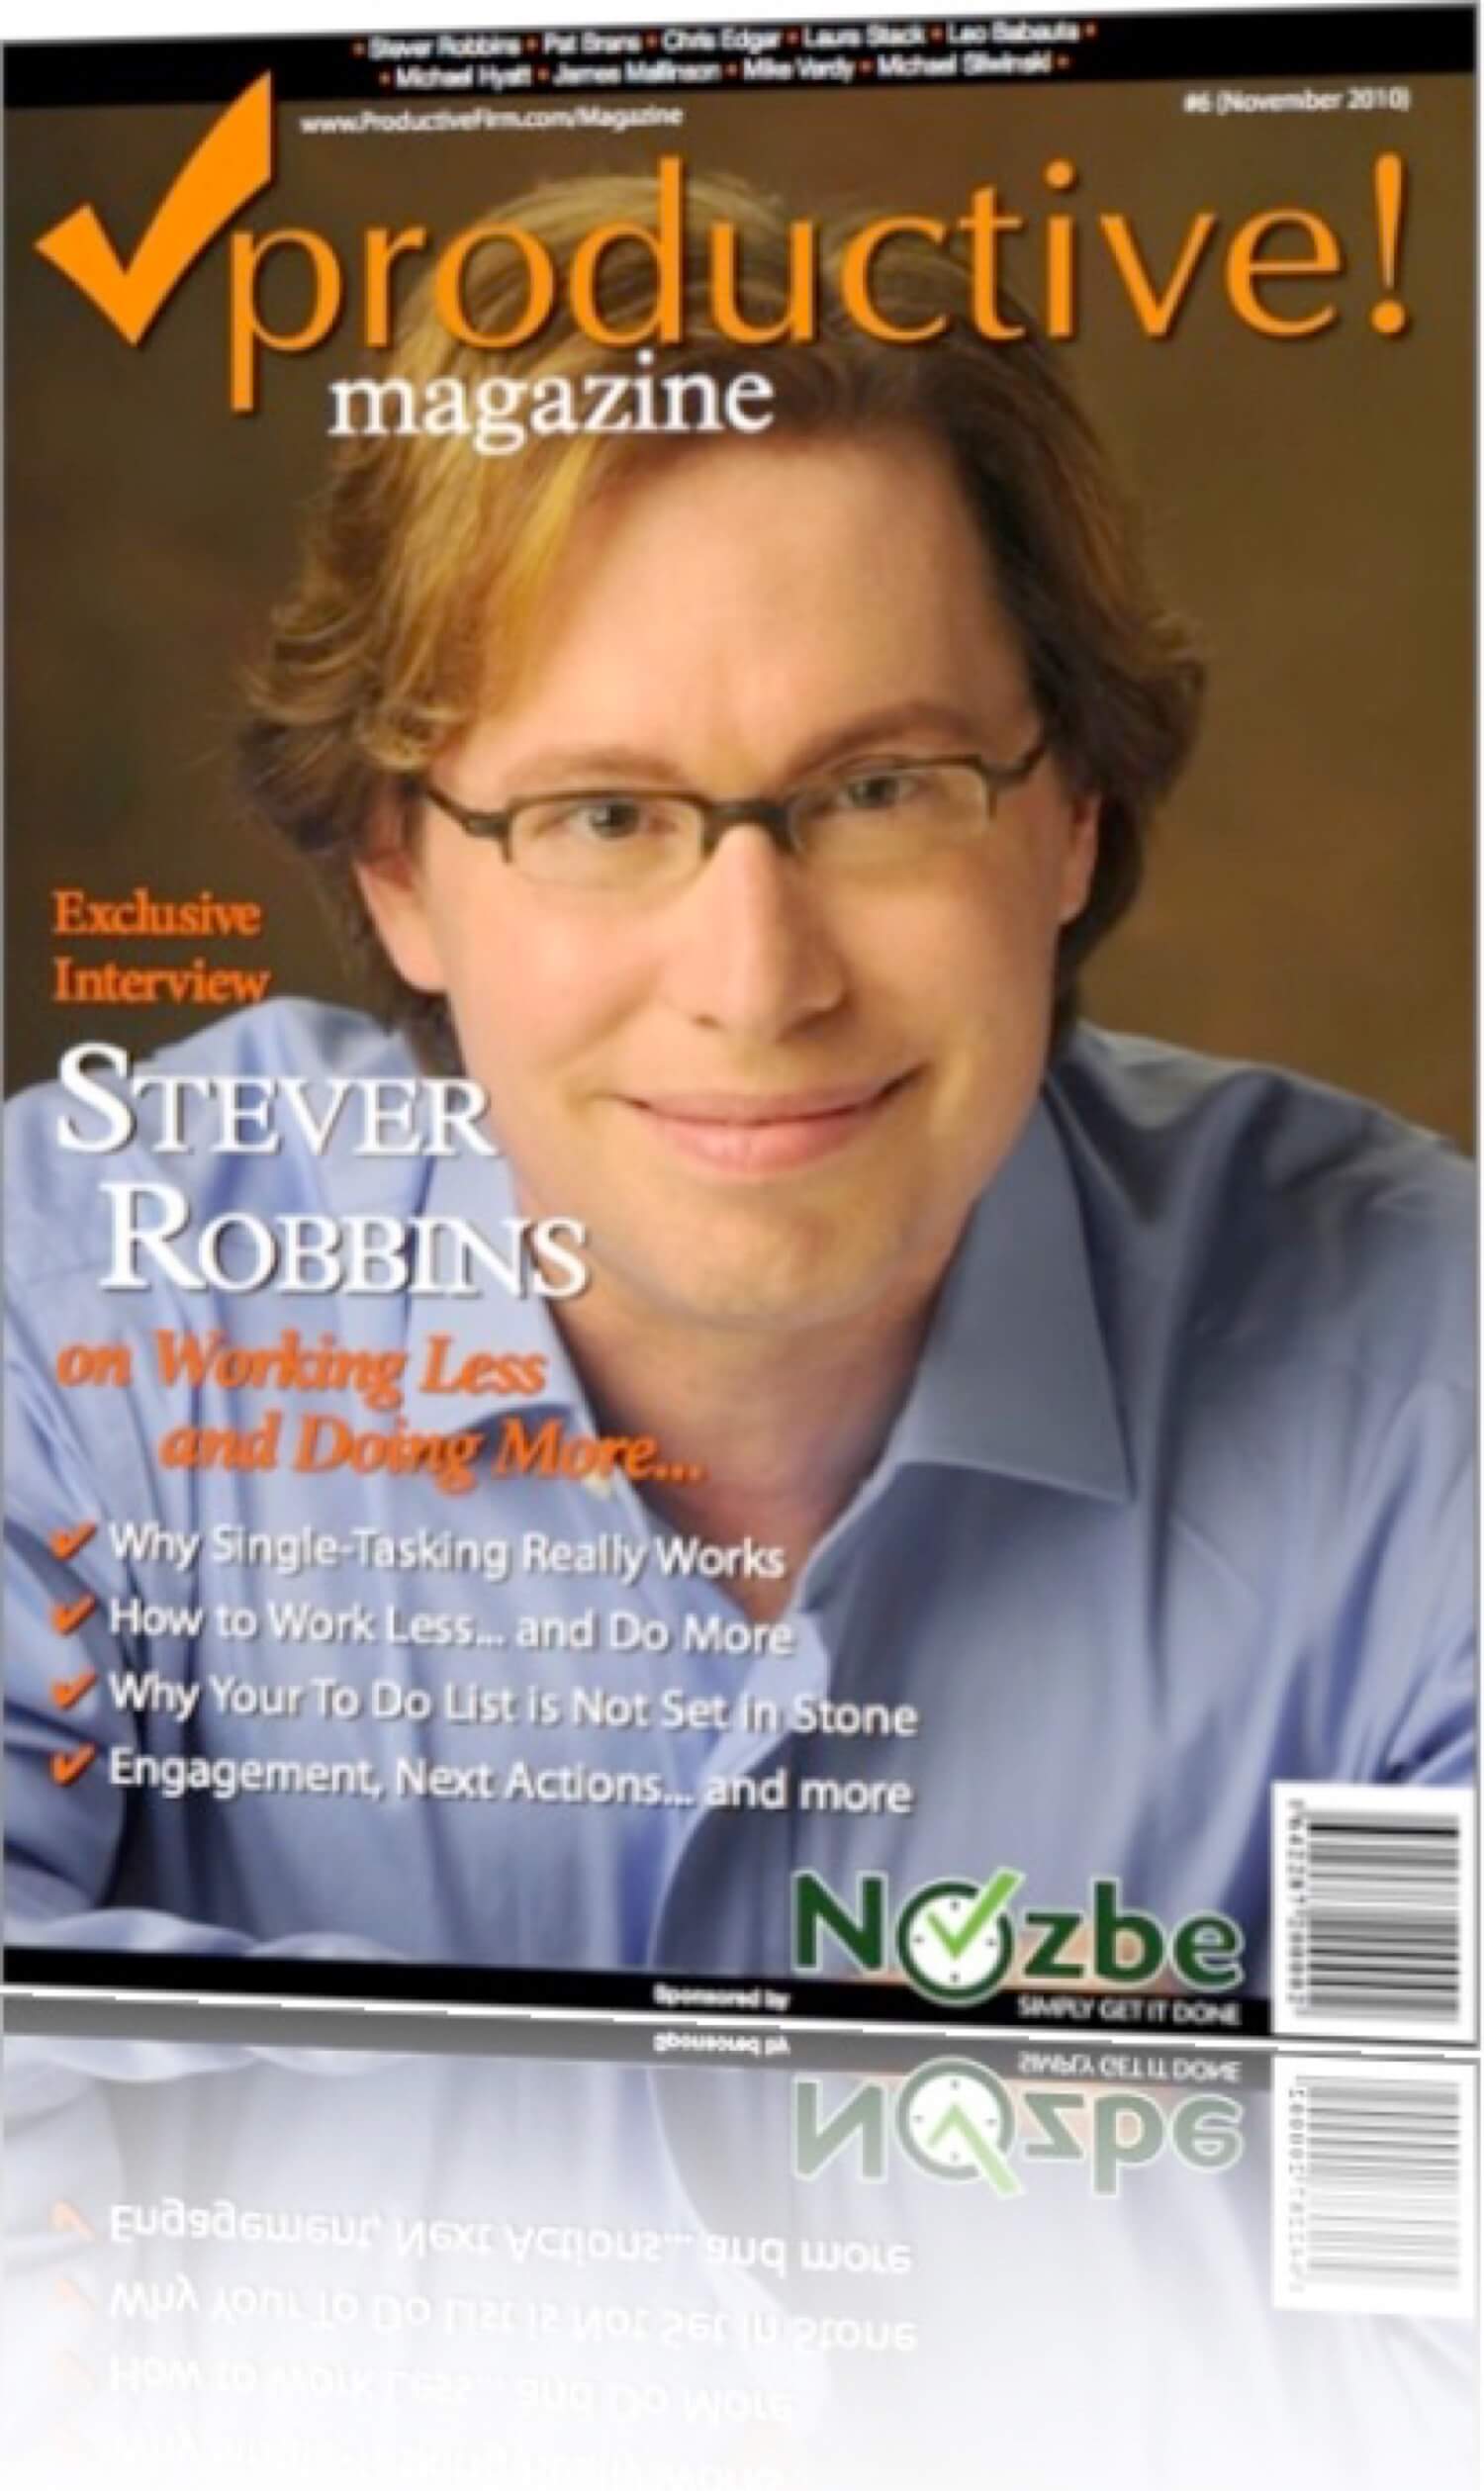 How to work less and do more - Stever Robbins in Productive! Magazine #6